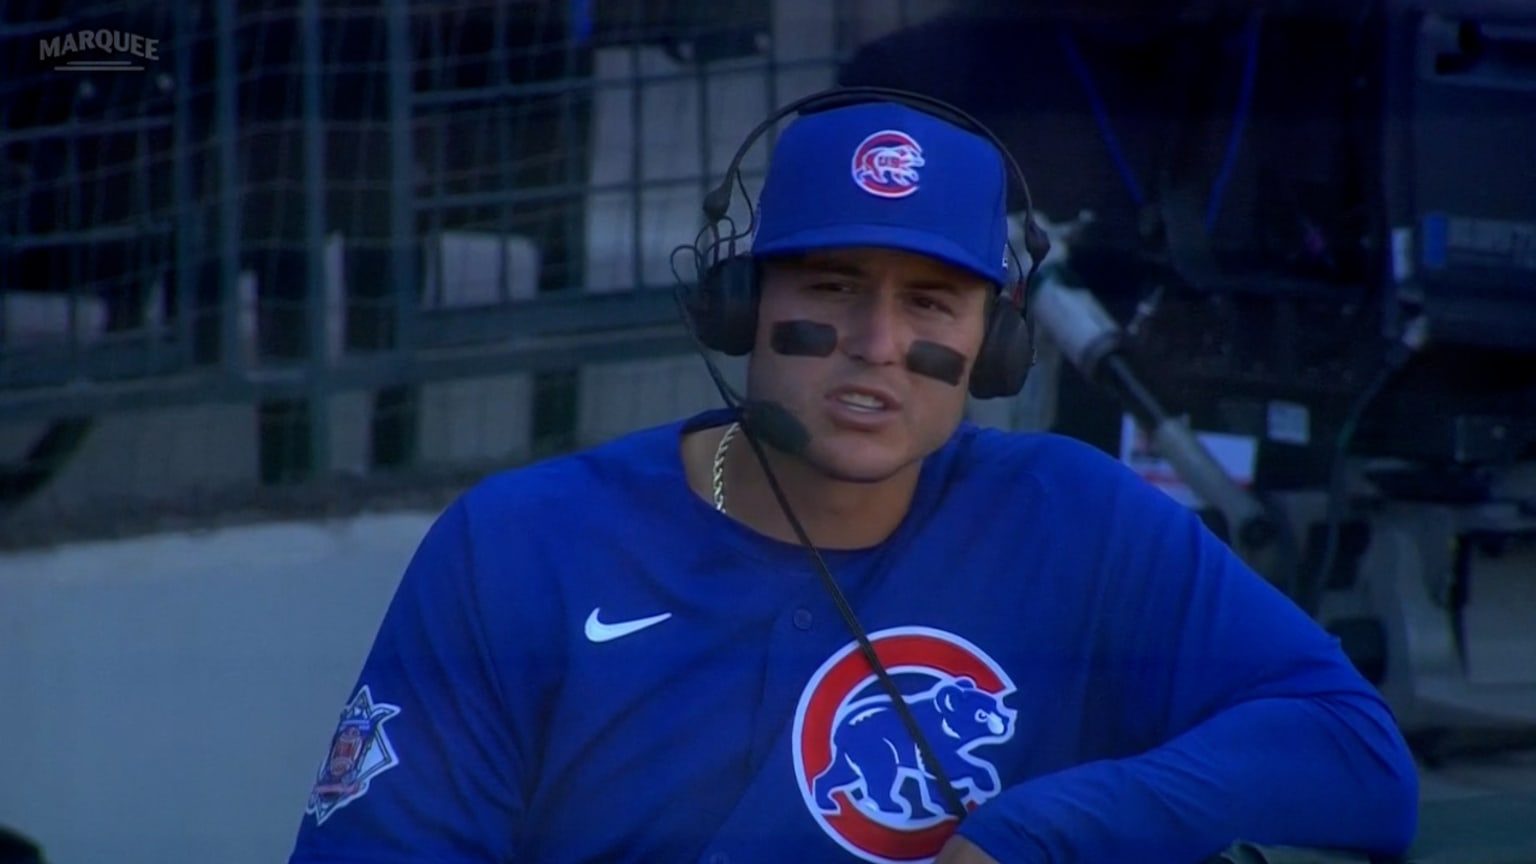 Anthony Rizzo on cleats, swing, 03/20/2021